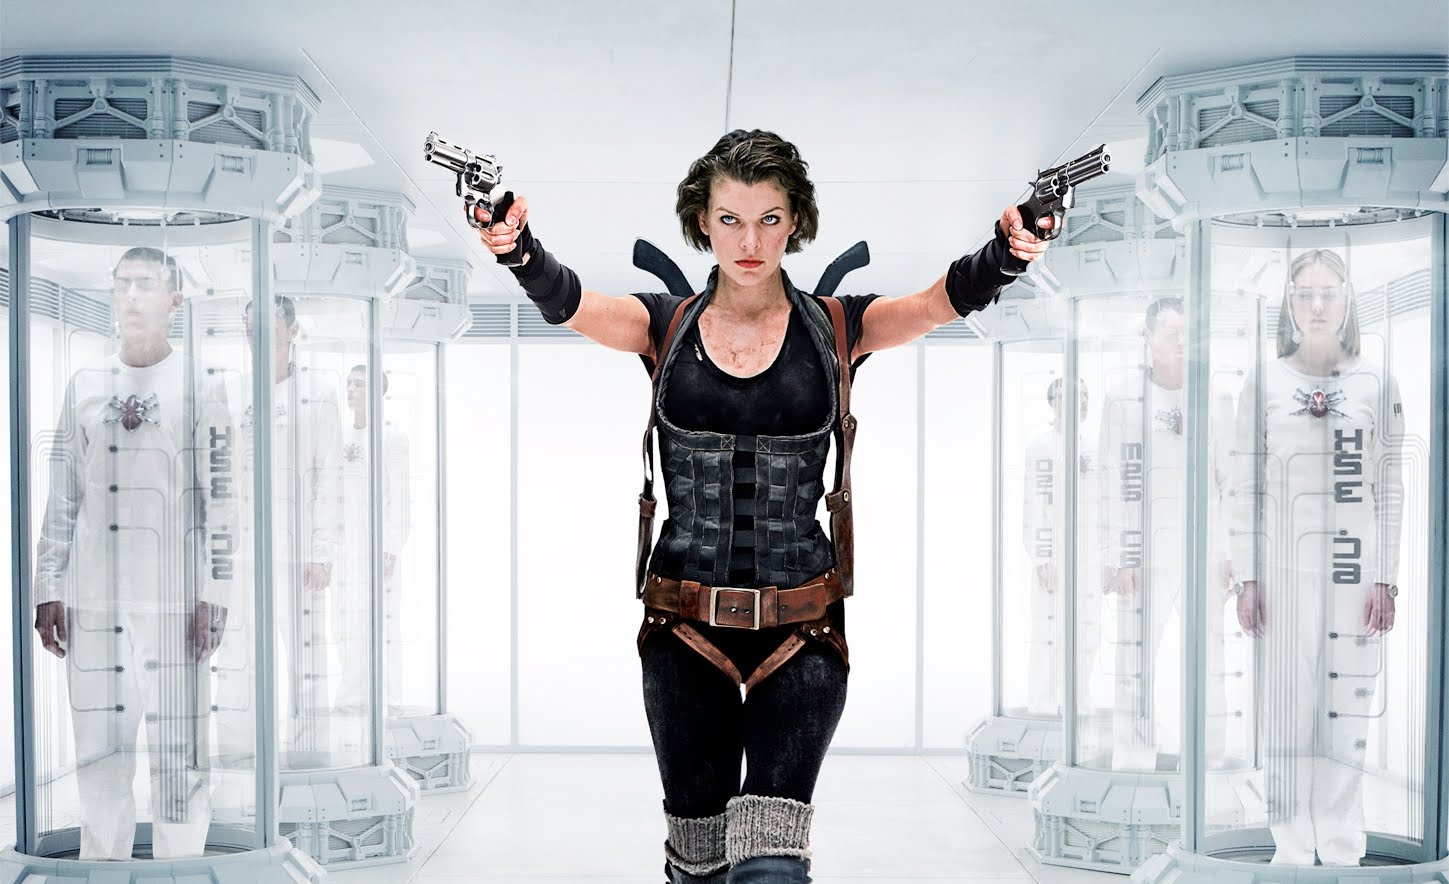 Review: Resident Evil: The Final Chapter - Rely on Horror